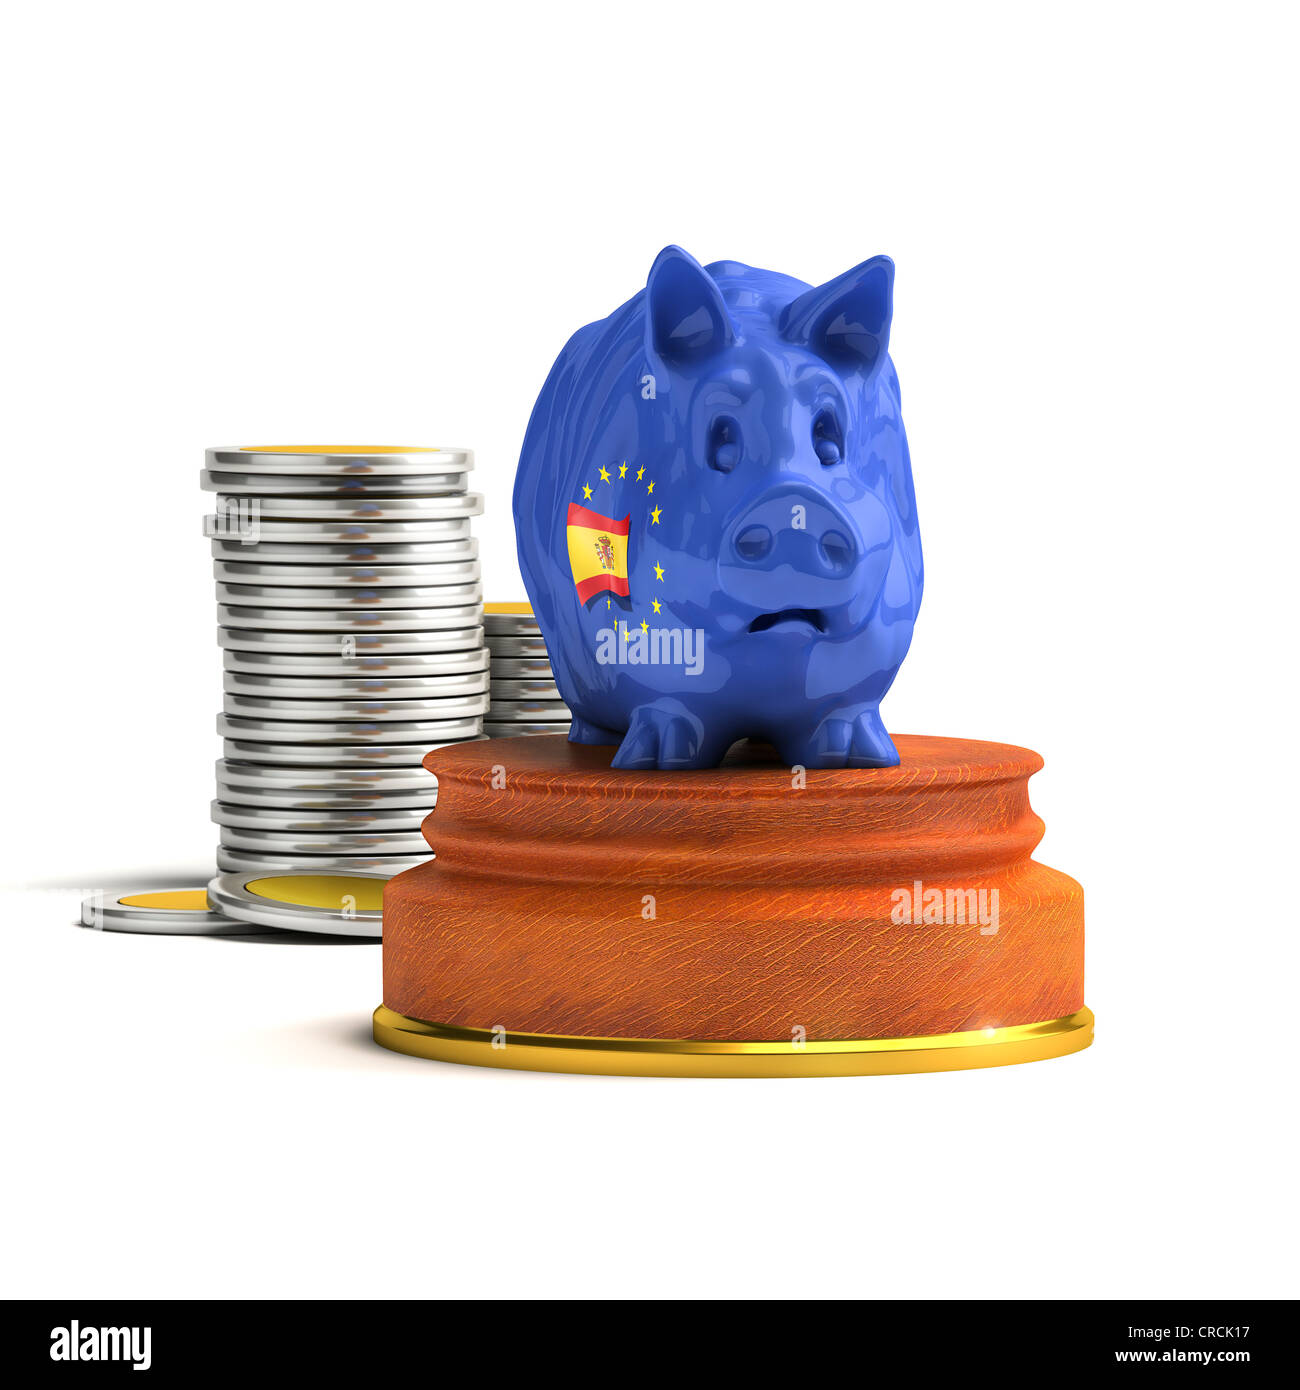 Free Images : smartphone, mobile, europe, ceramic, flag, business, brand,  empire, art, currency, coin, eu, piggy bank, pig, european, banks, clip,  collect, trump, seem, many, success, carbon, online, cent, forward, metal  money